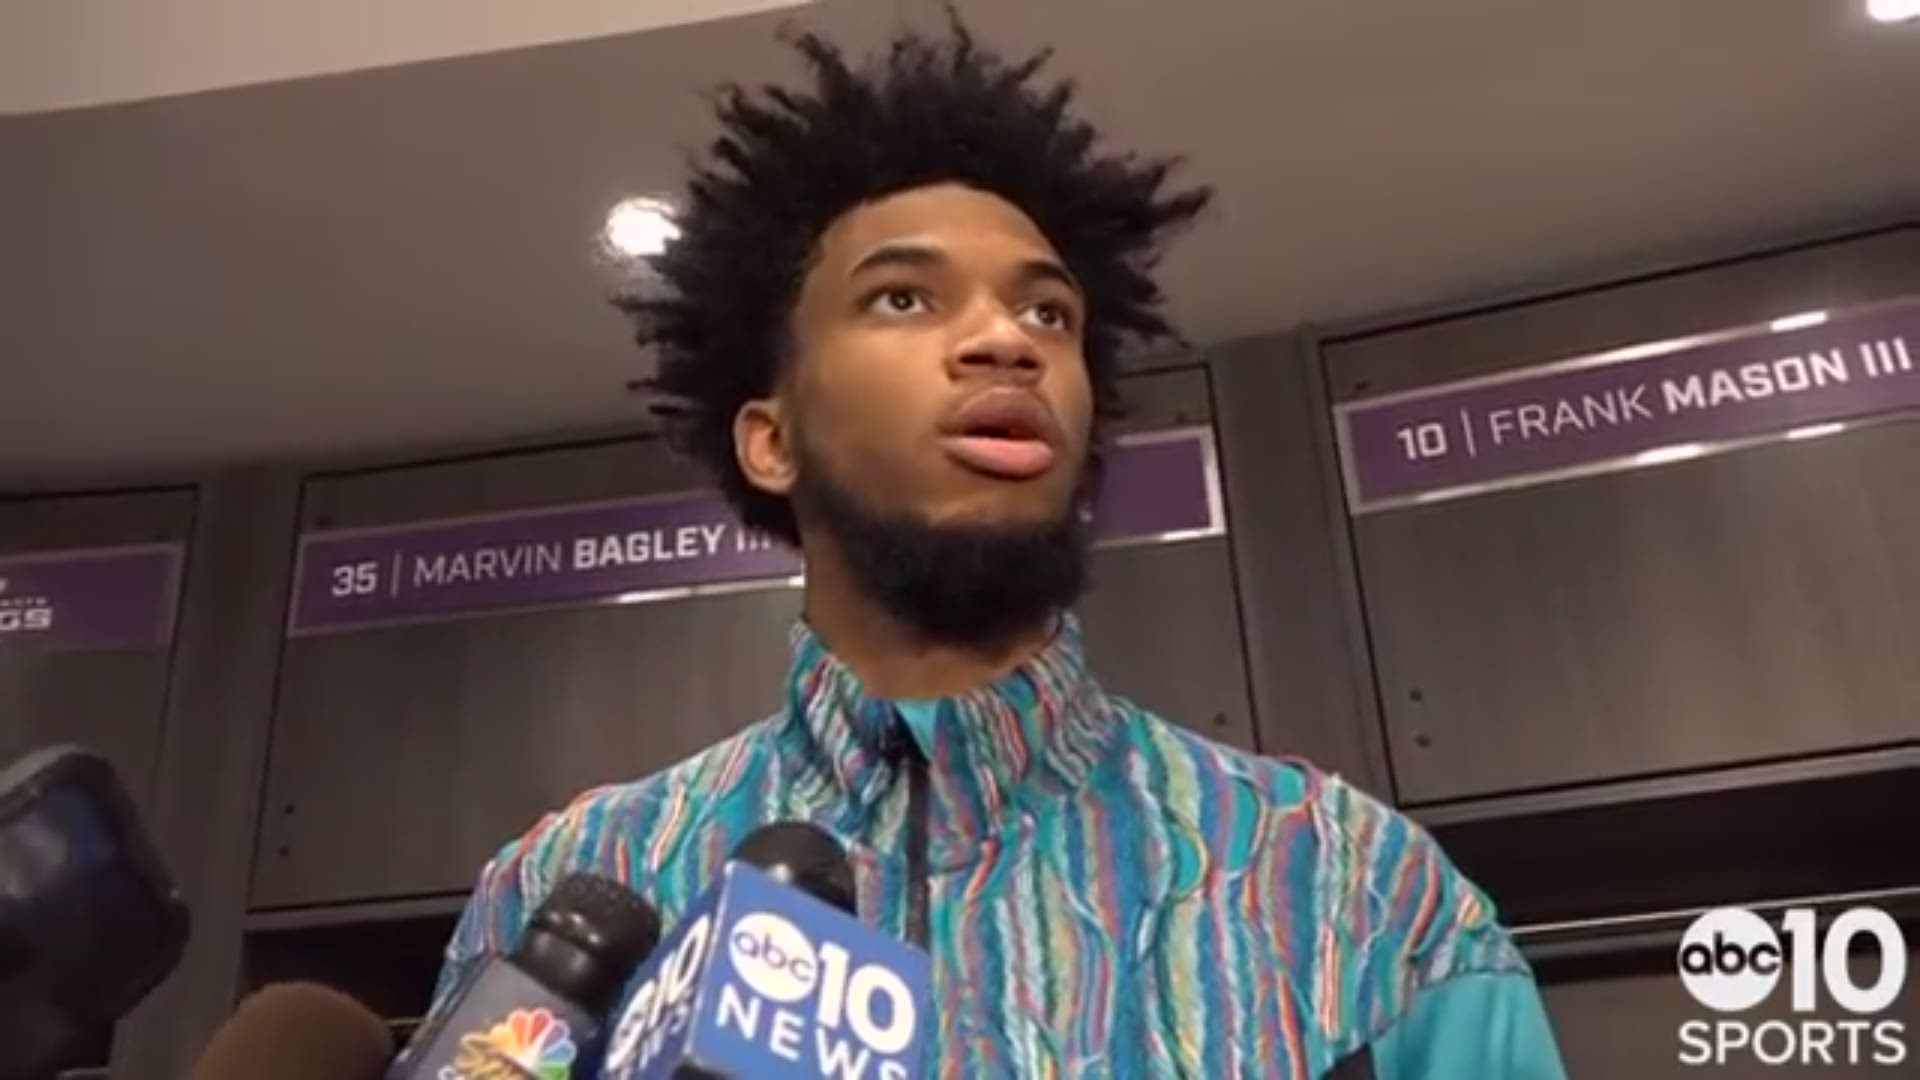 Sacramento Kings rookie Marvin Bagley III gives his thoughts on his team blowing a 28-point lead in the second half to the Brooklyn Nets and falling 123-121 on Tuesday night.